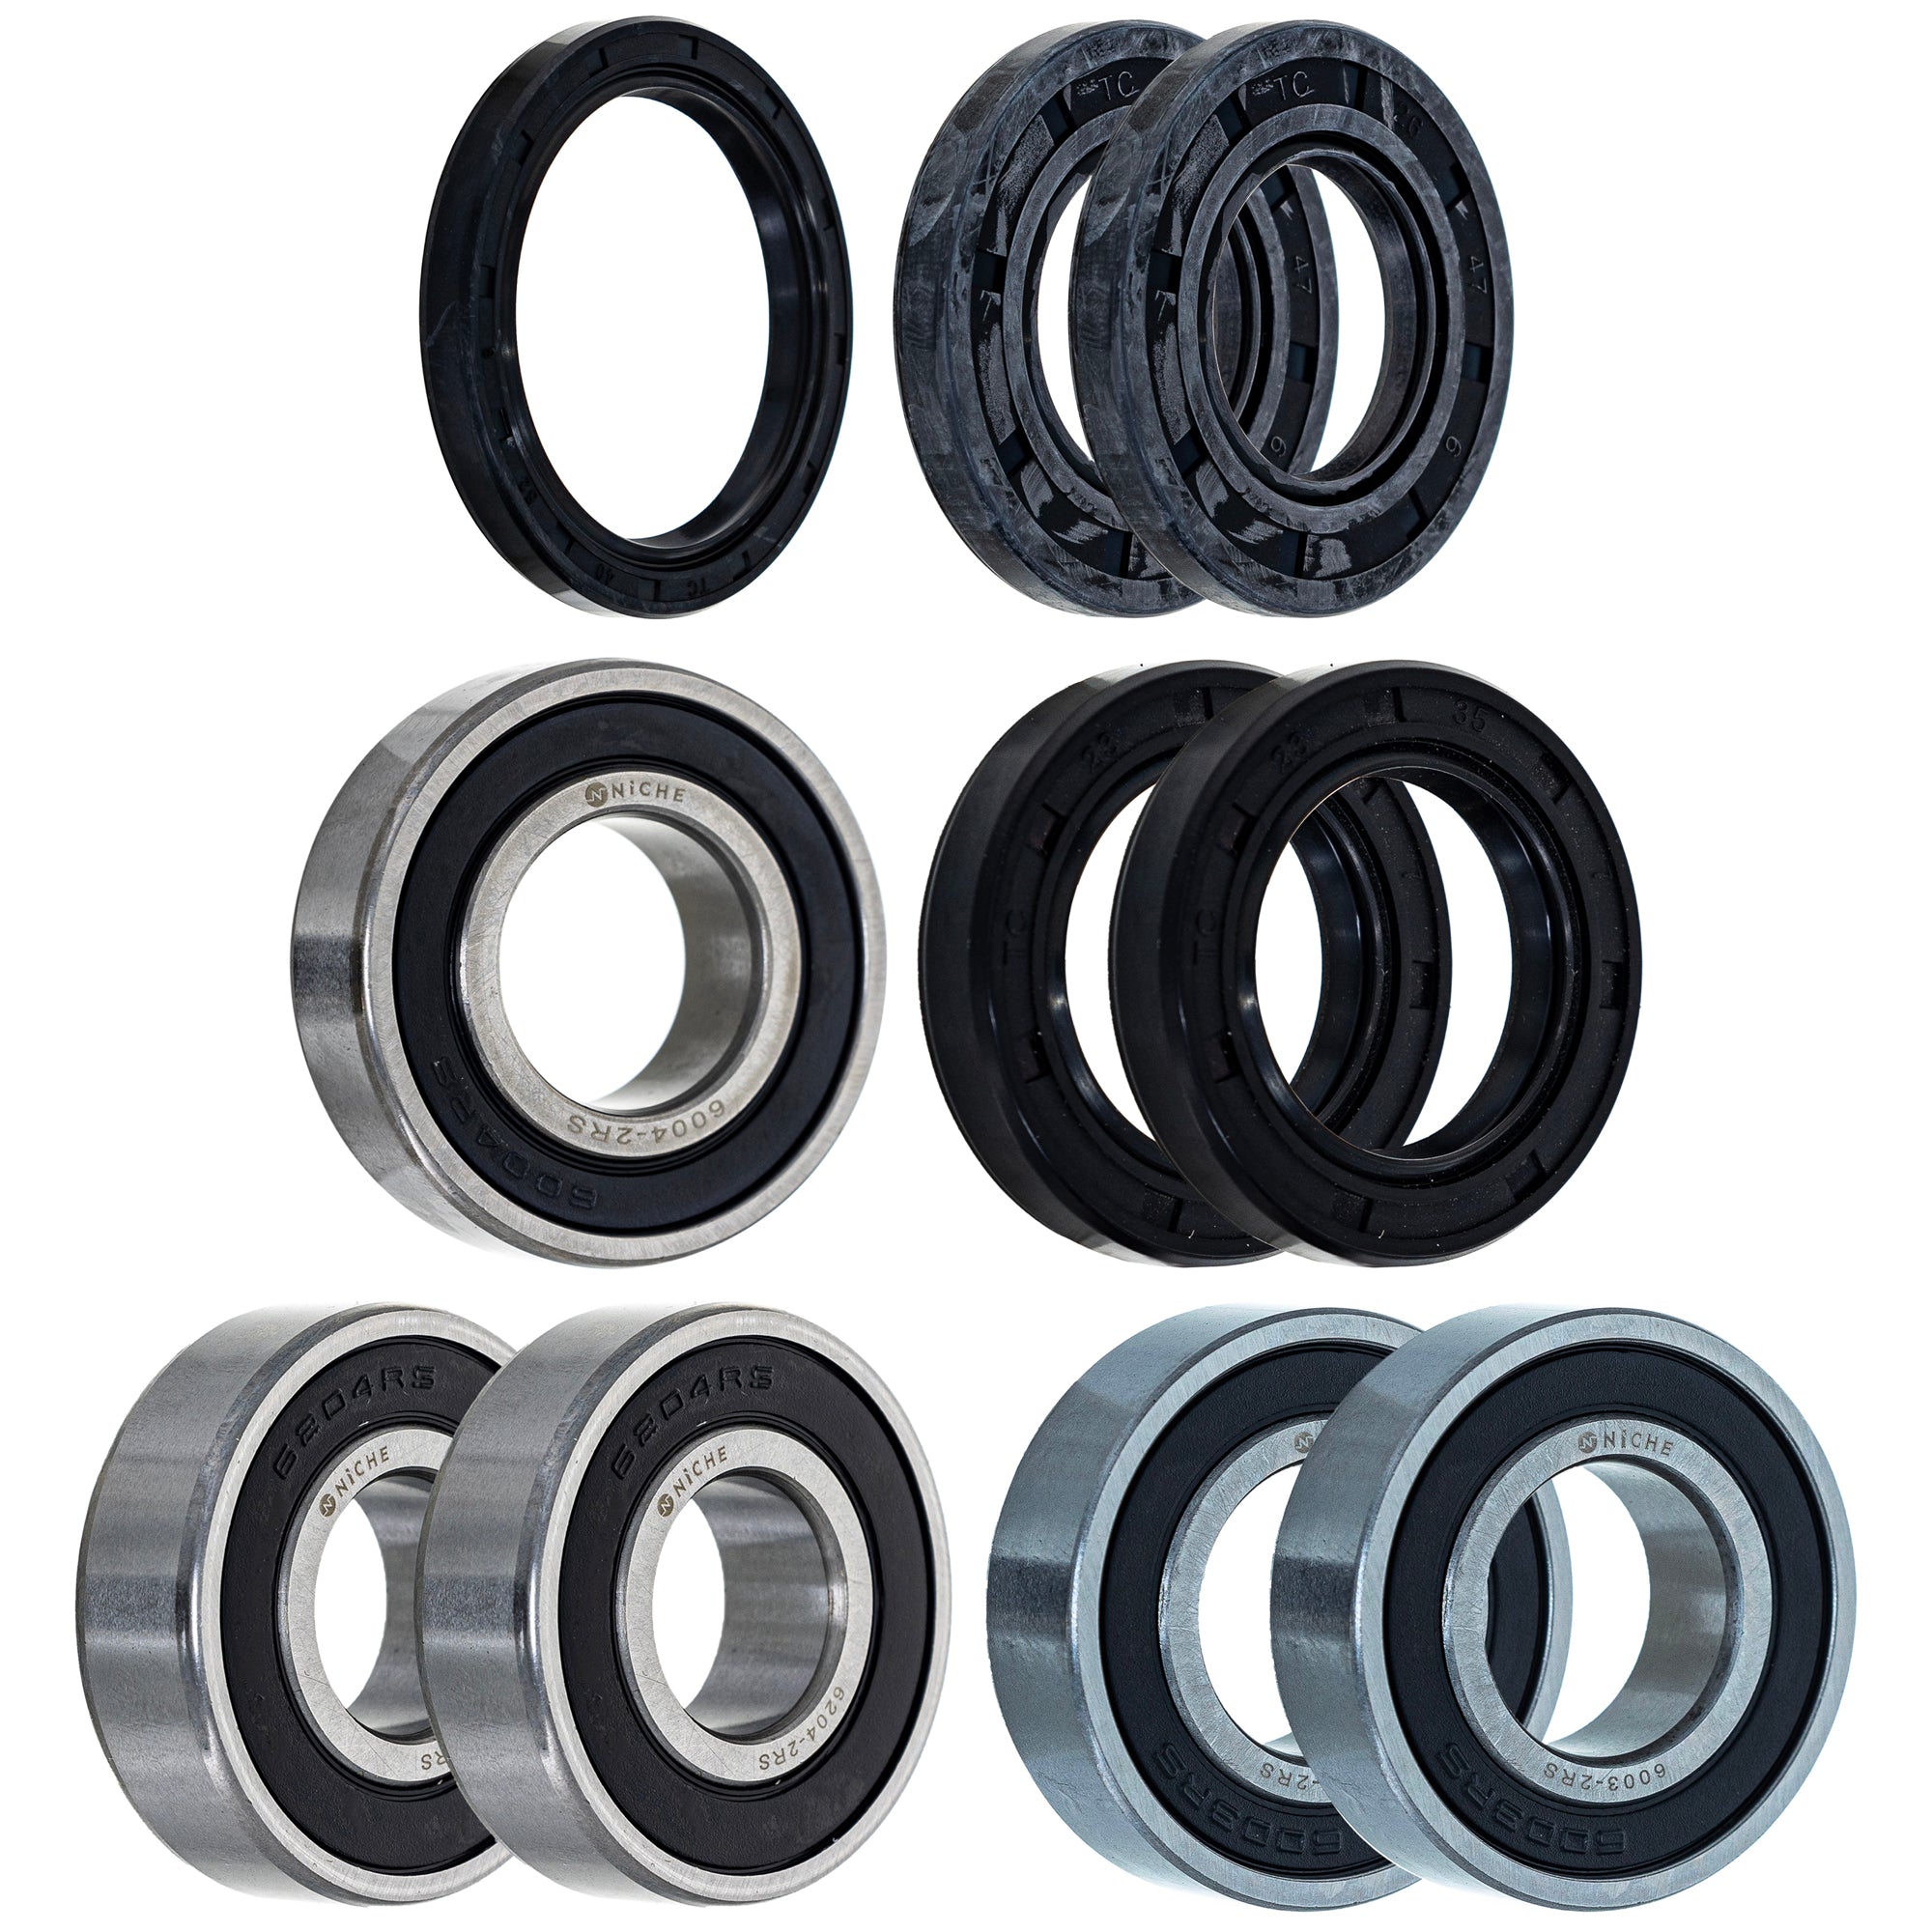 Wheel Bearing Seal Kit for zOTHER Ref No RMX250 NICHE MK1008679